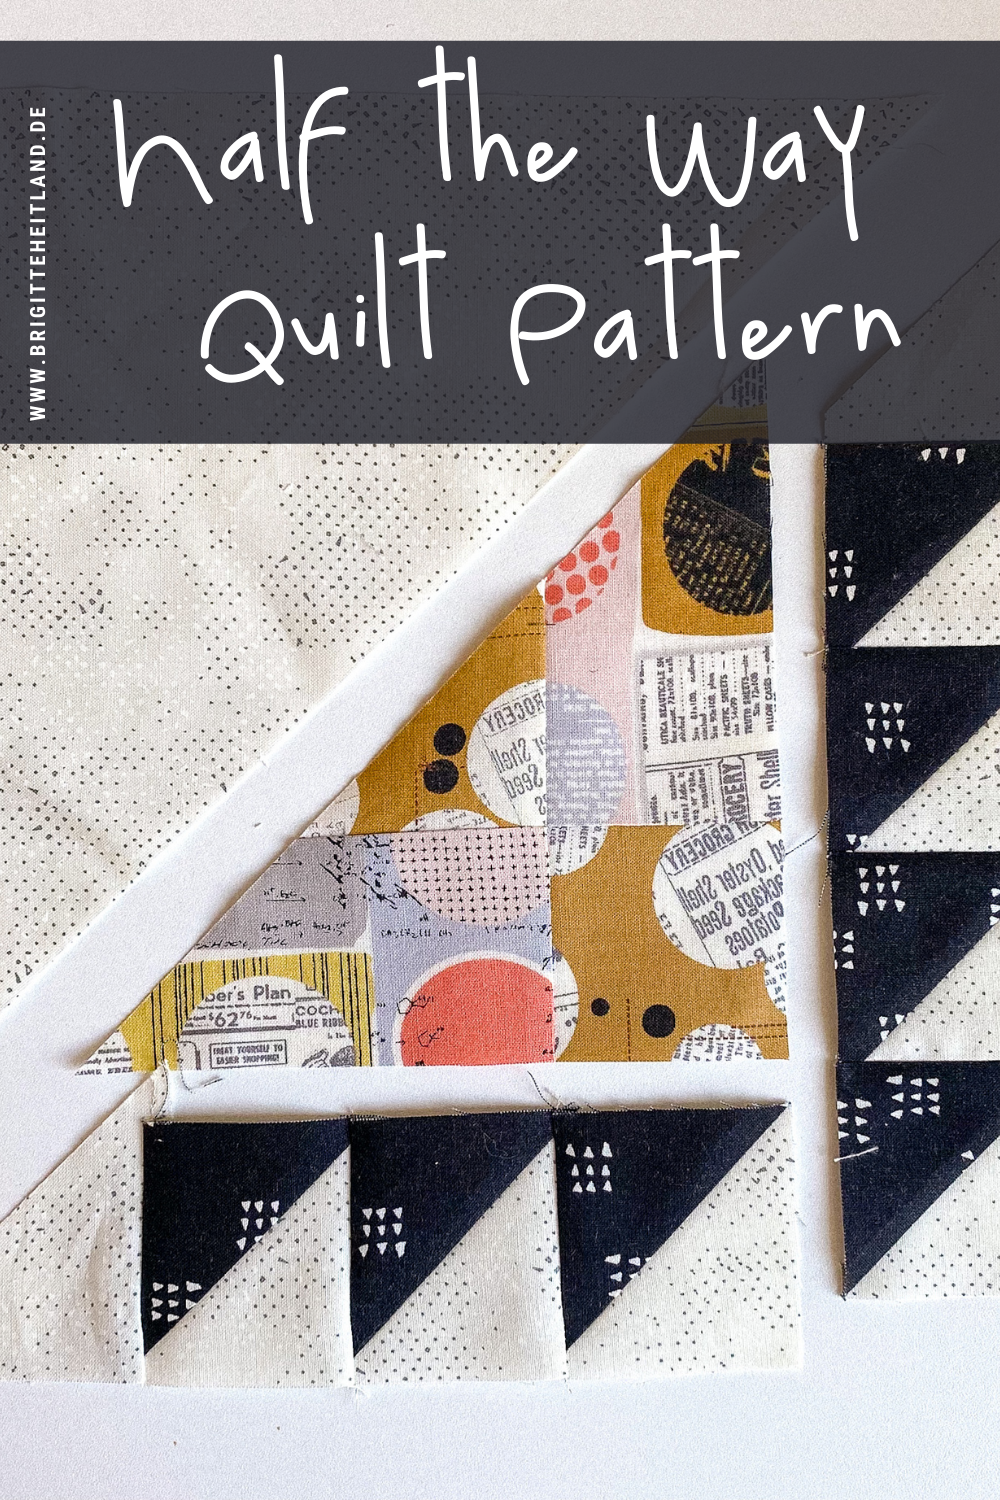 Quilt Inspiration: Free pattern day: Easy Modern Quilts (2)